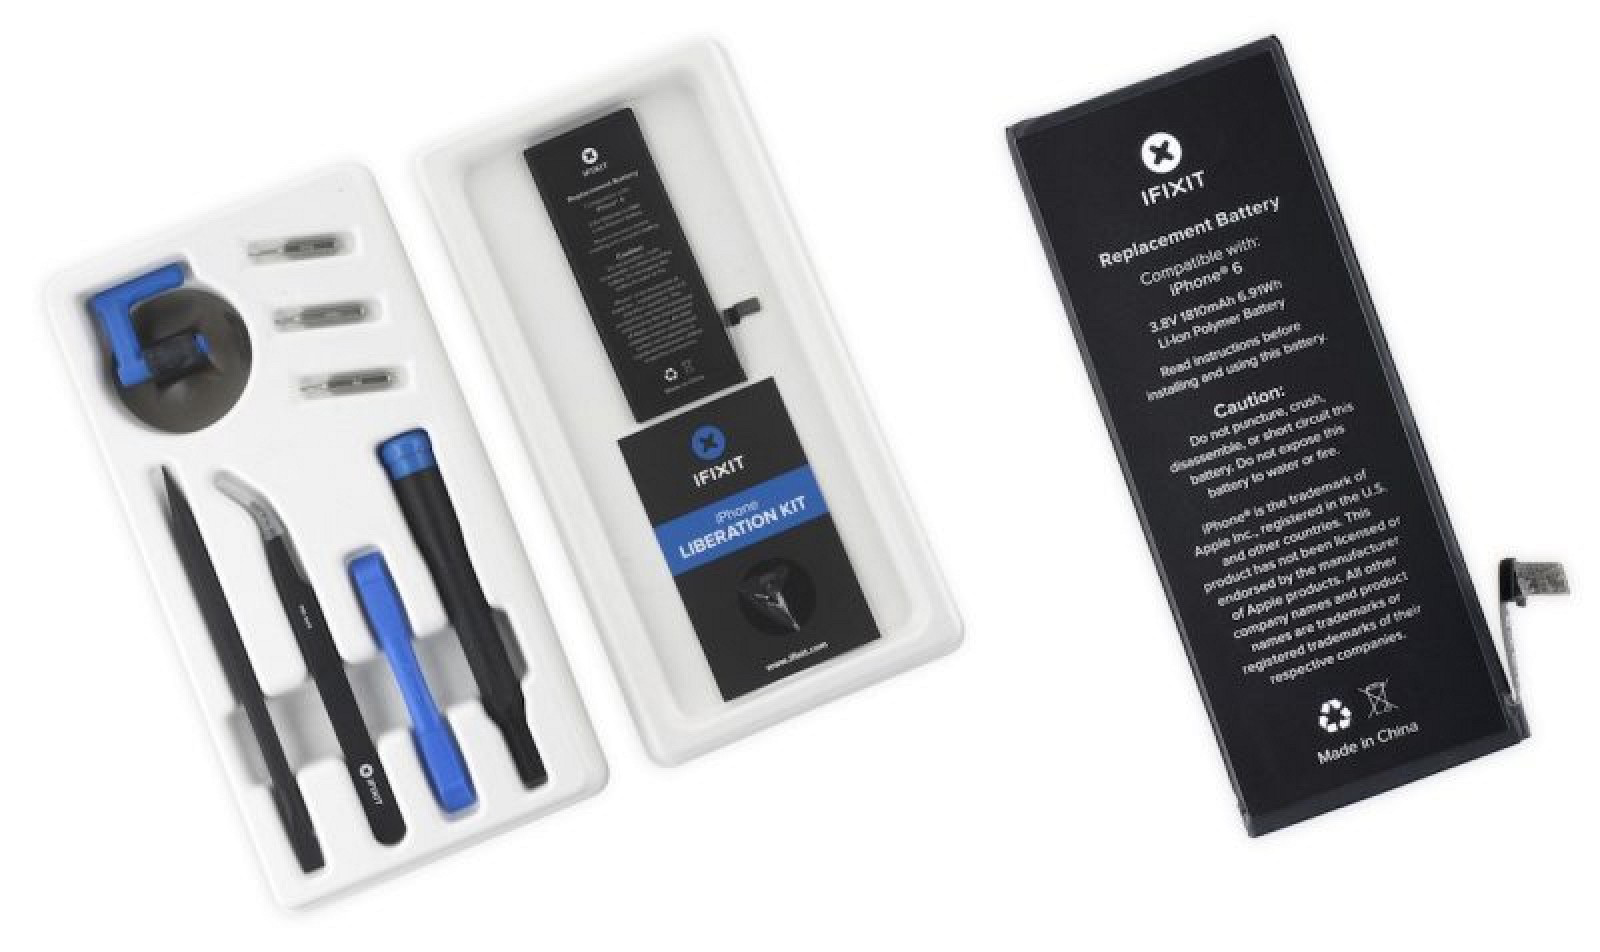 iFixit- iPhone battery replacement kits will cost $29